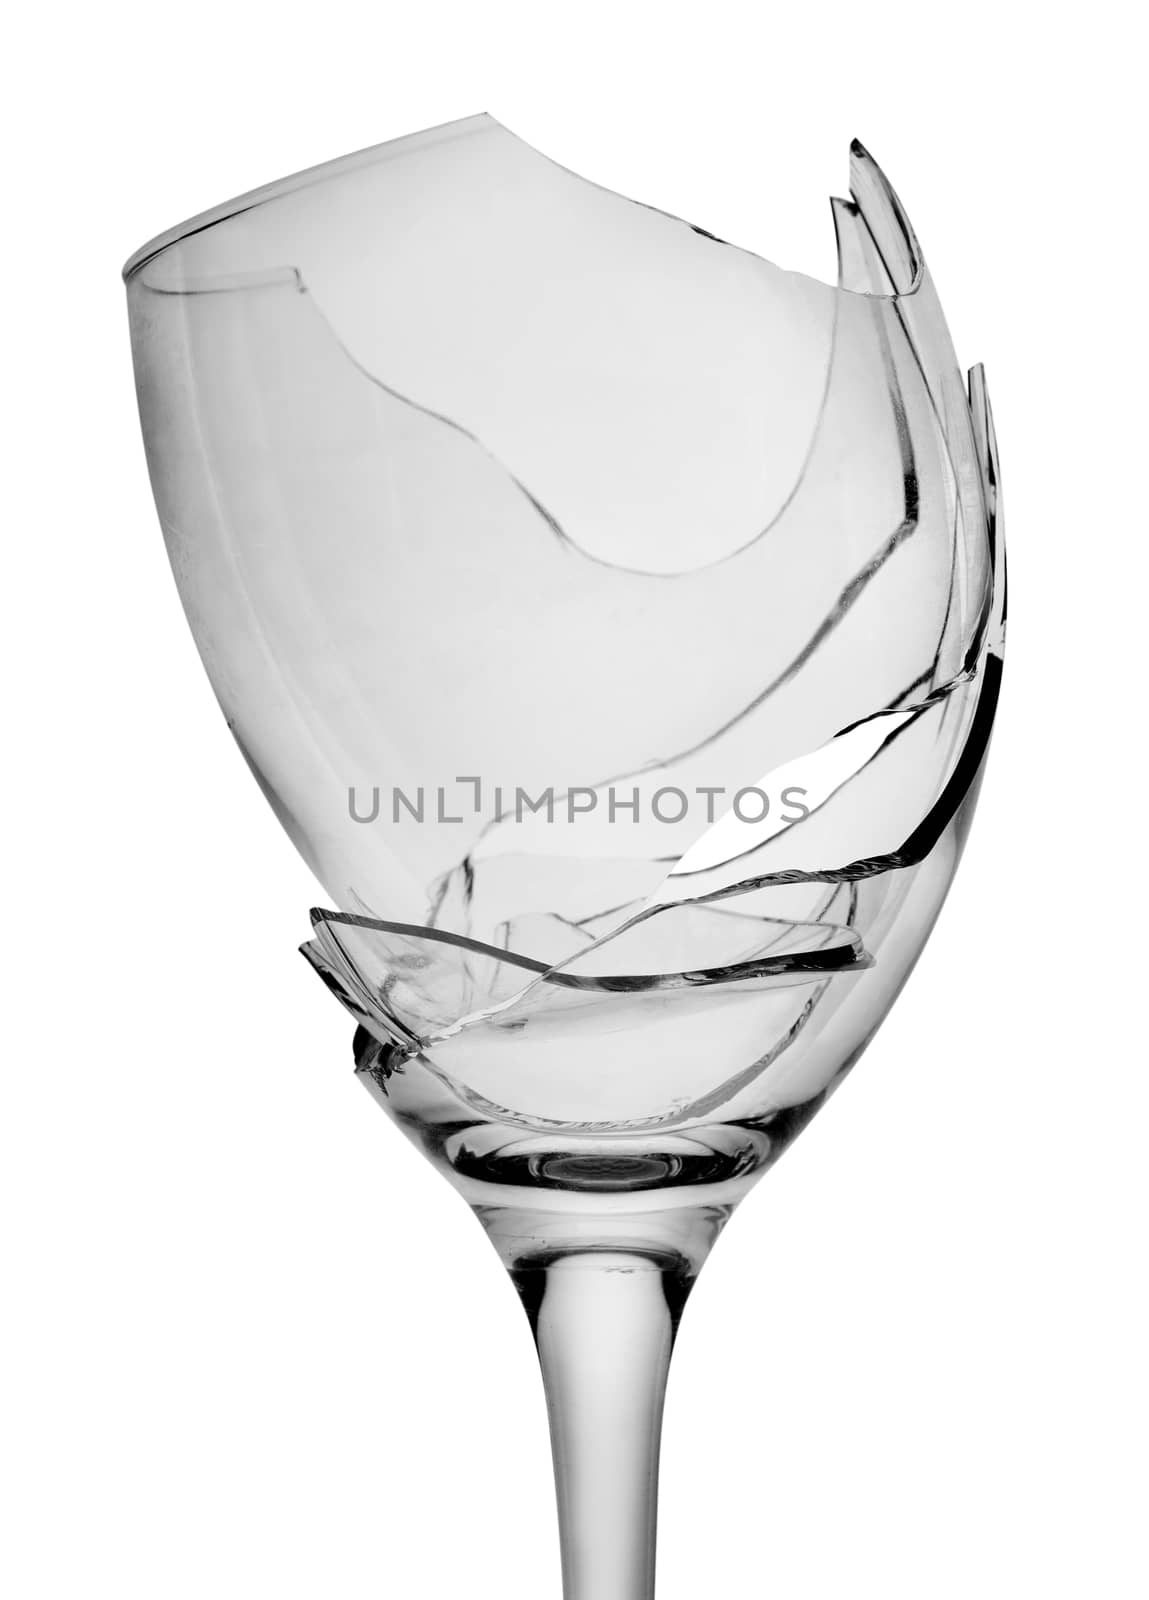 Broken glass close-up isolated on a white background